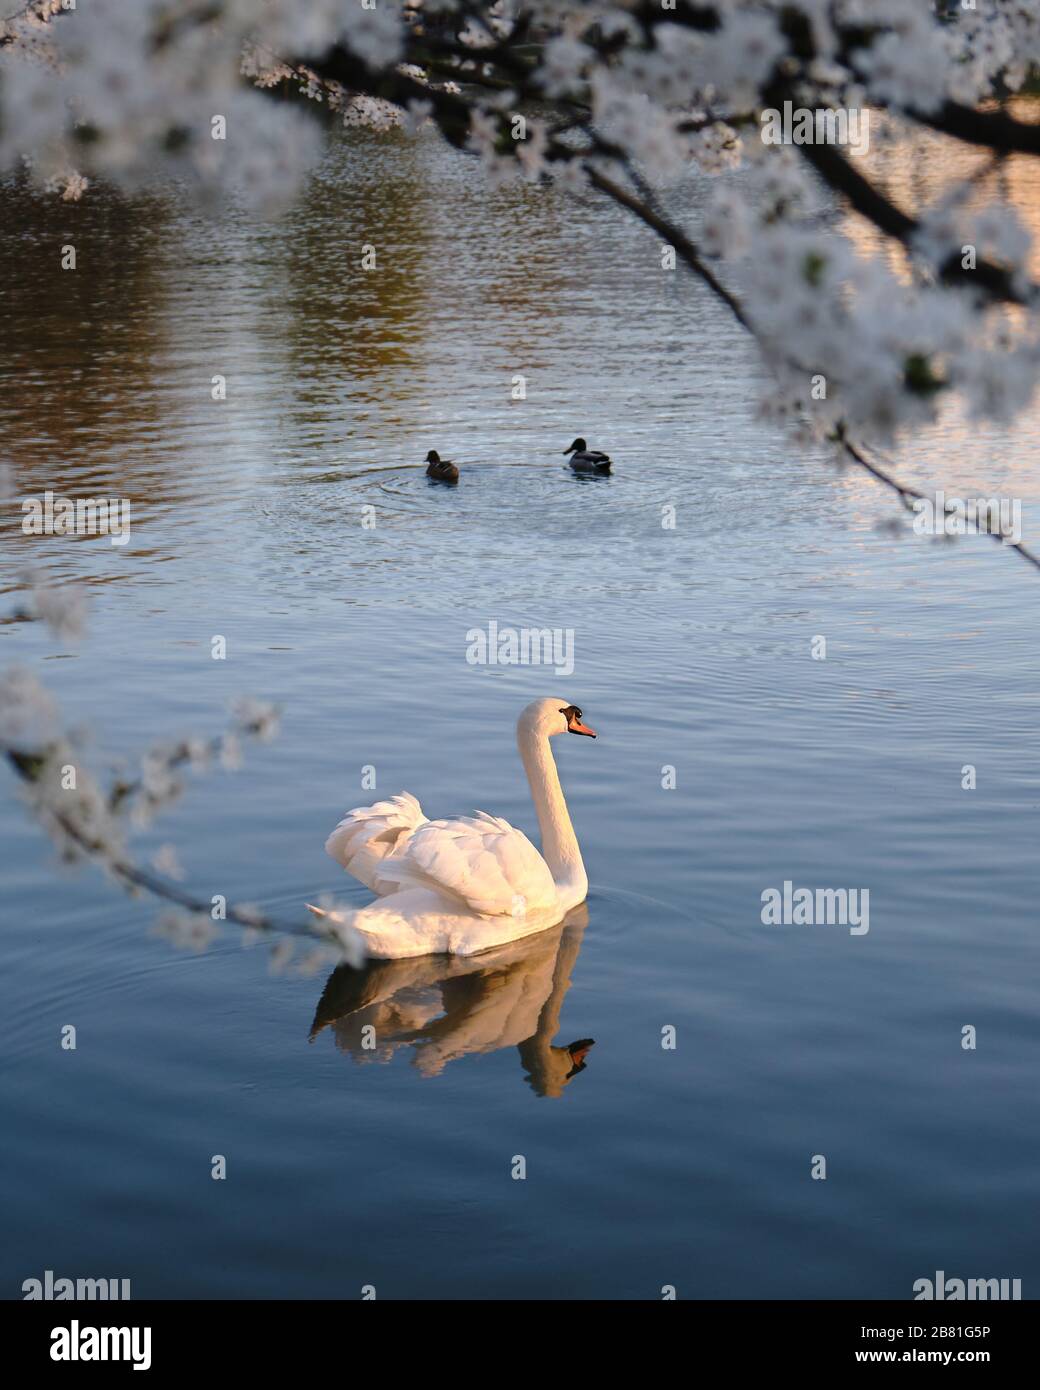 White Mute swan with light shining on its feathers, at sunset, swims in dark blue waters, under white Cherry plum flowers in Spring. Stock Photo